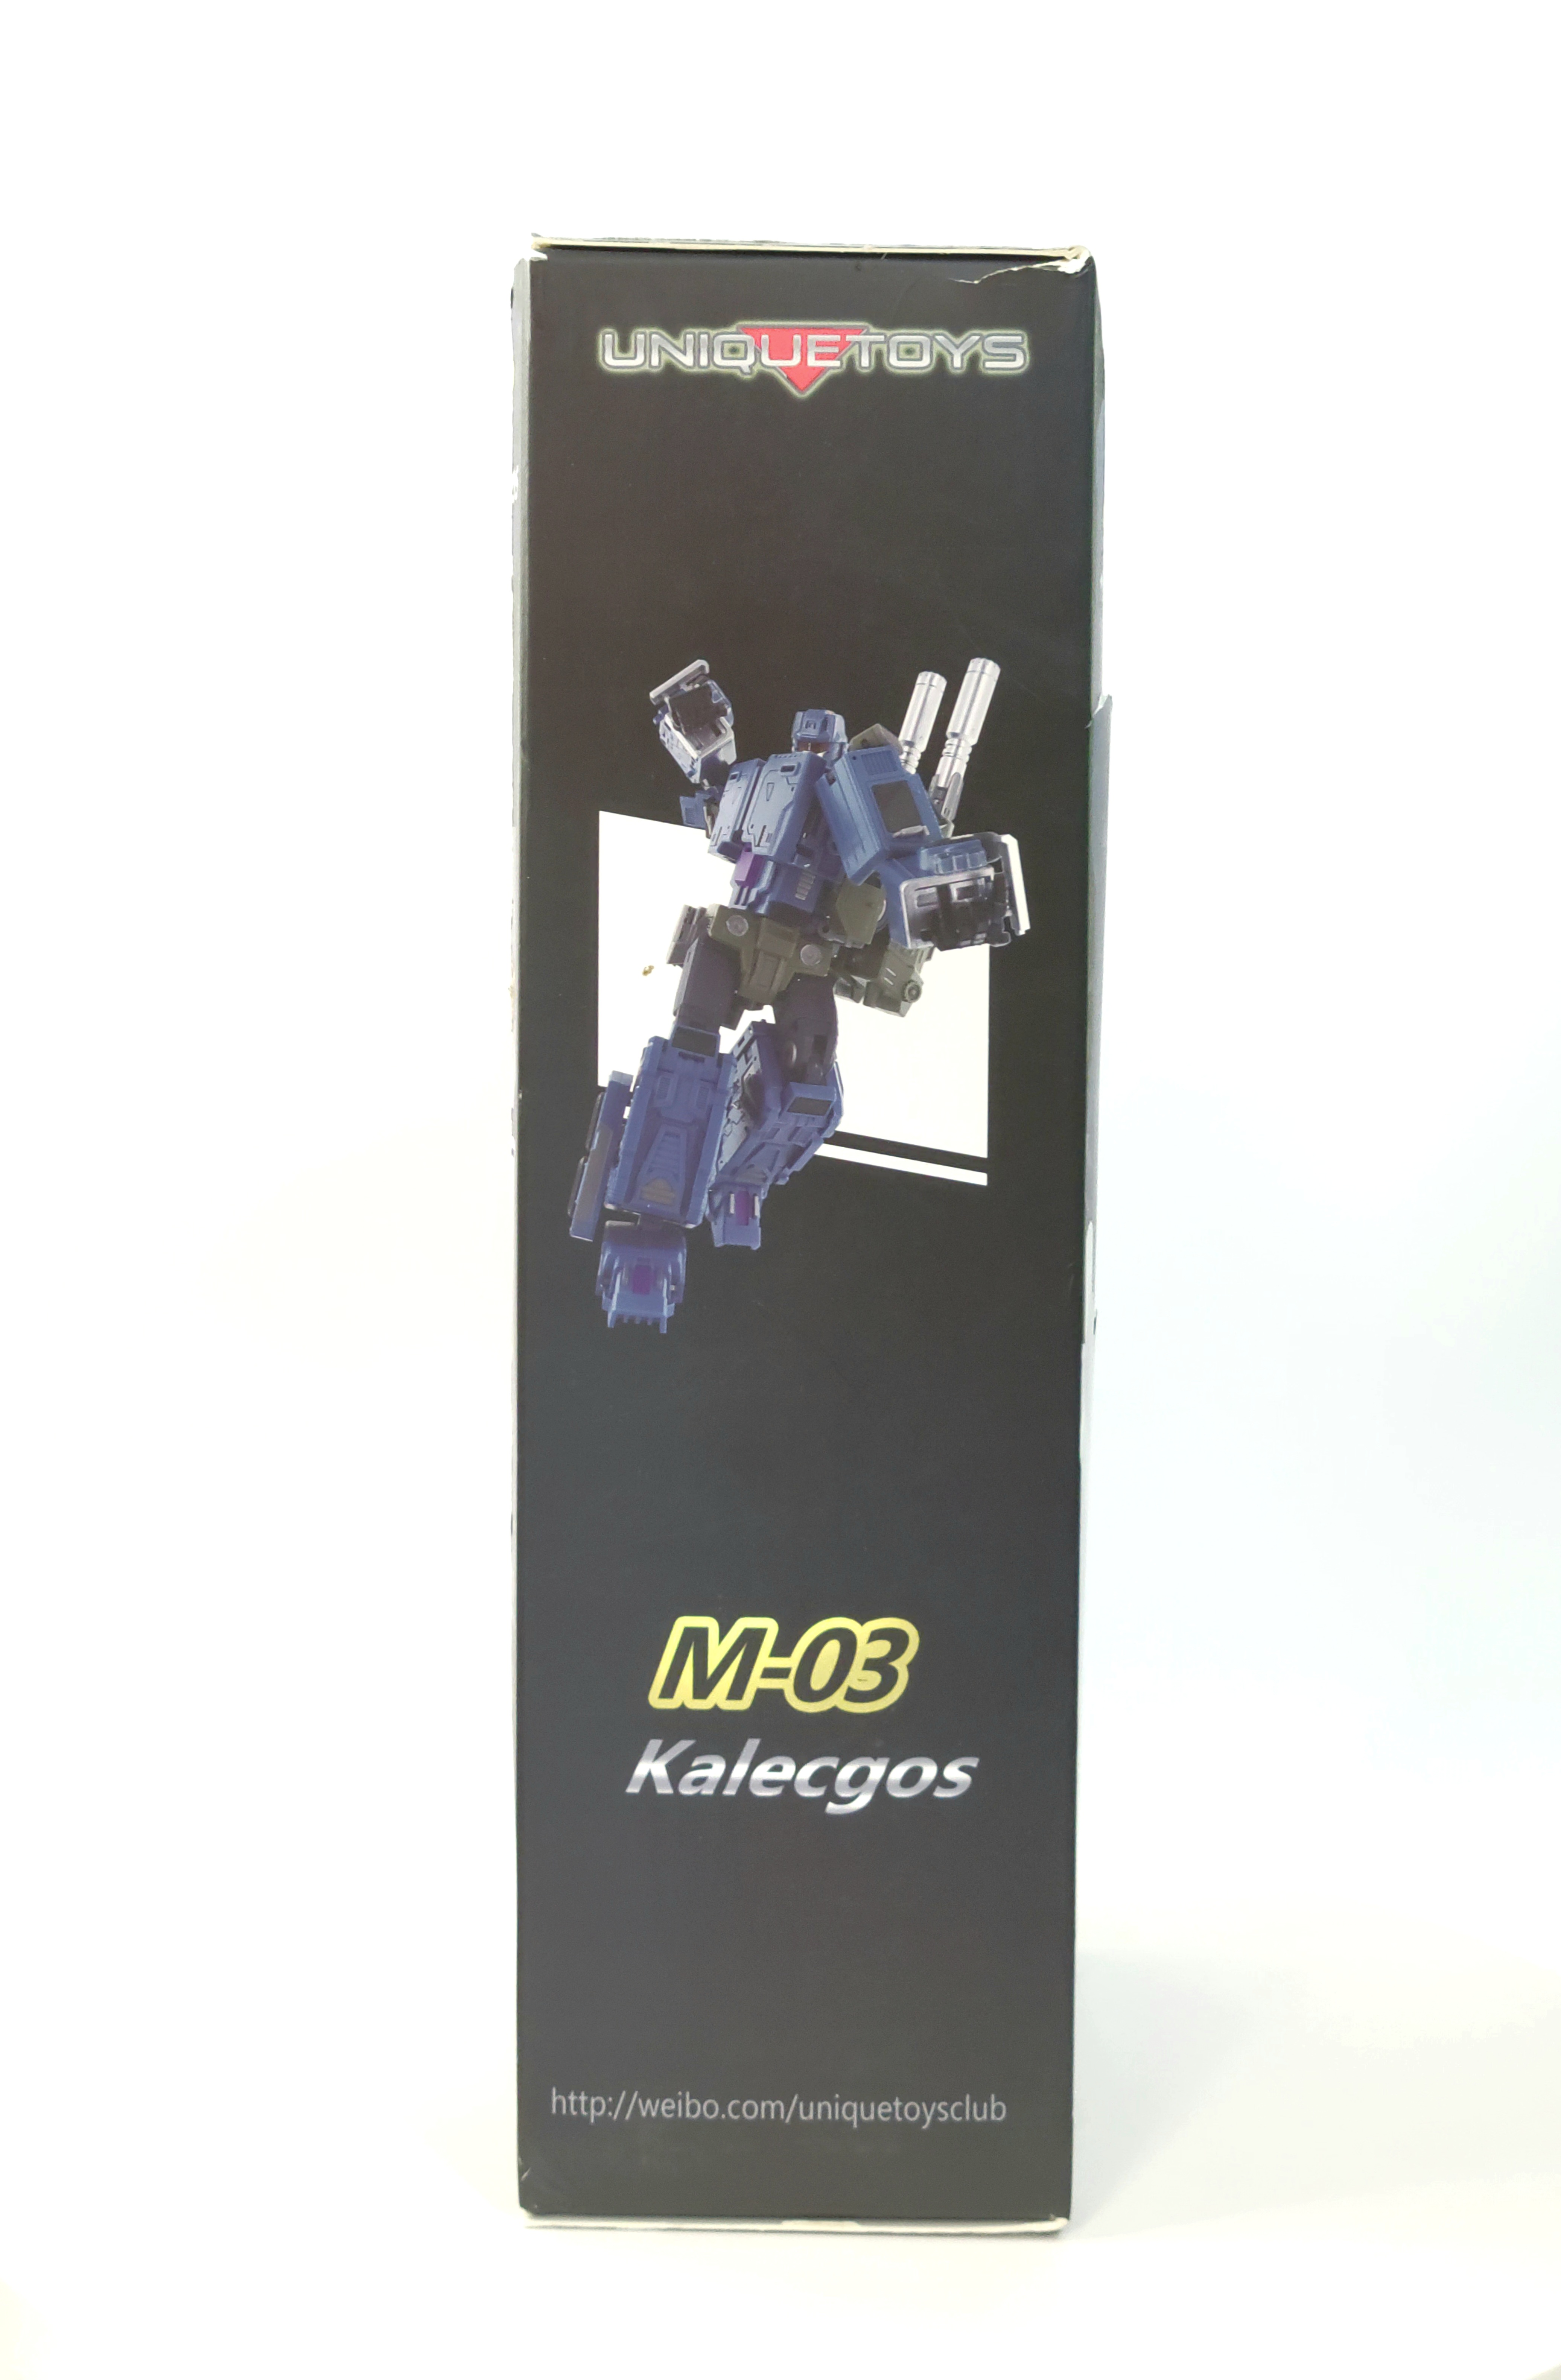 Unique Toys M 03 Kalegcos Stellar Warrior Onslaught BOX ONLY - NO FIGURE